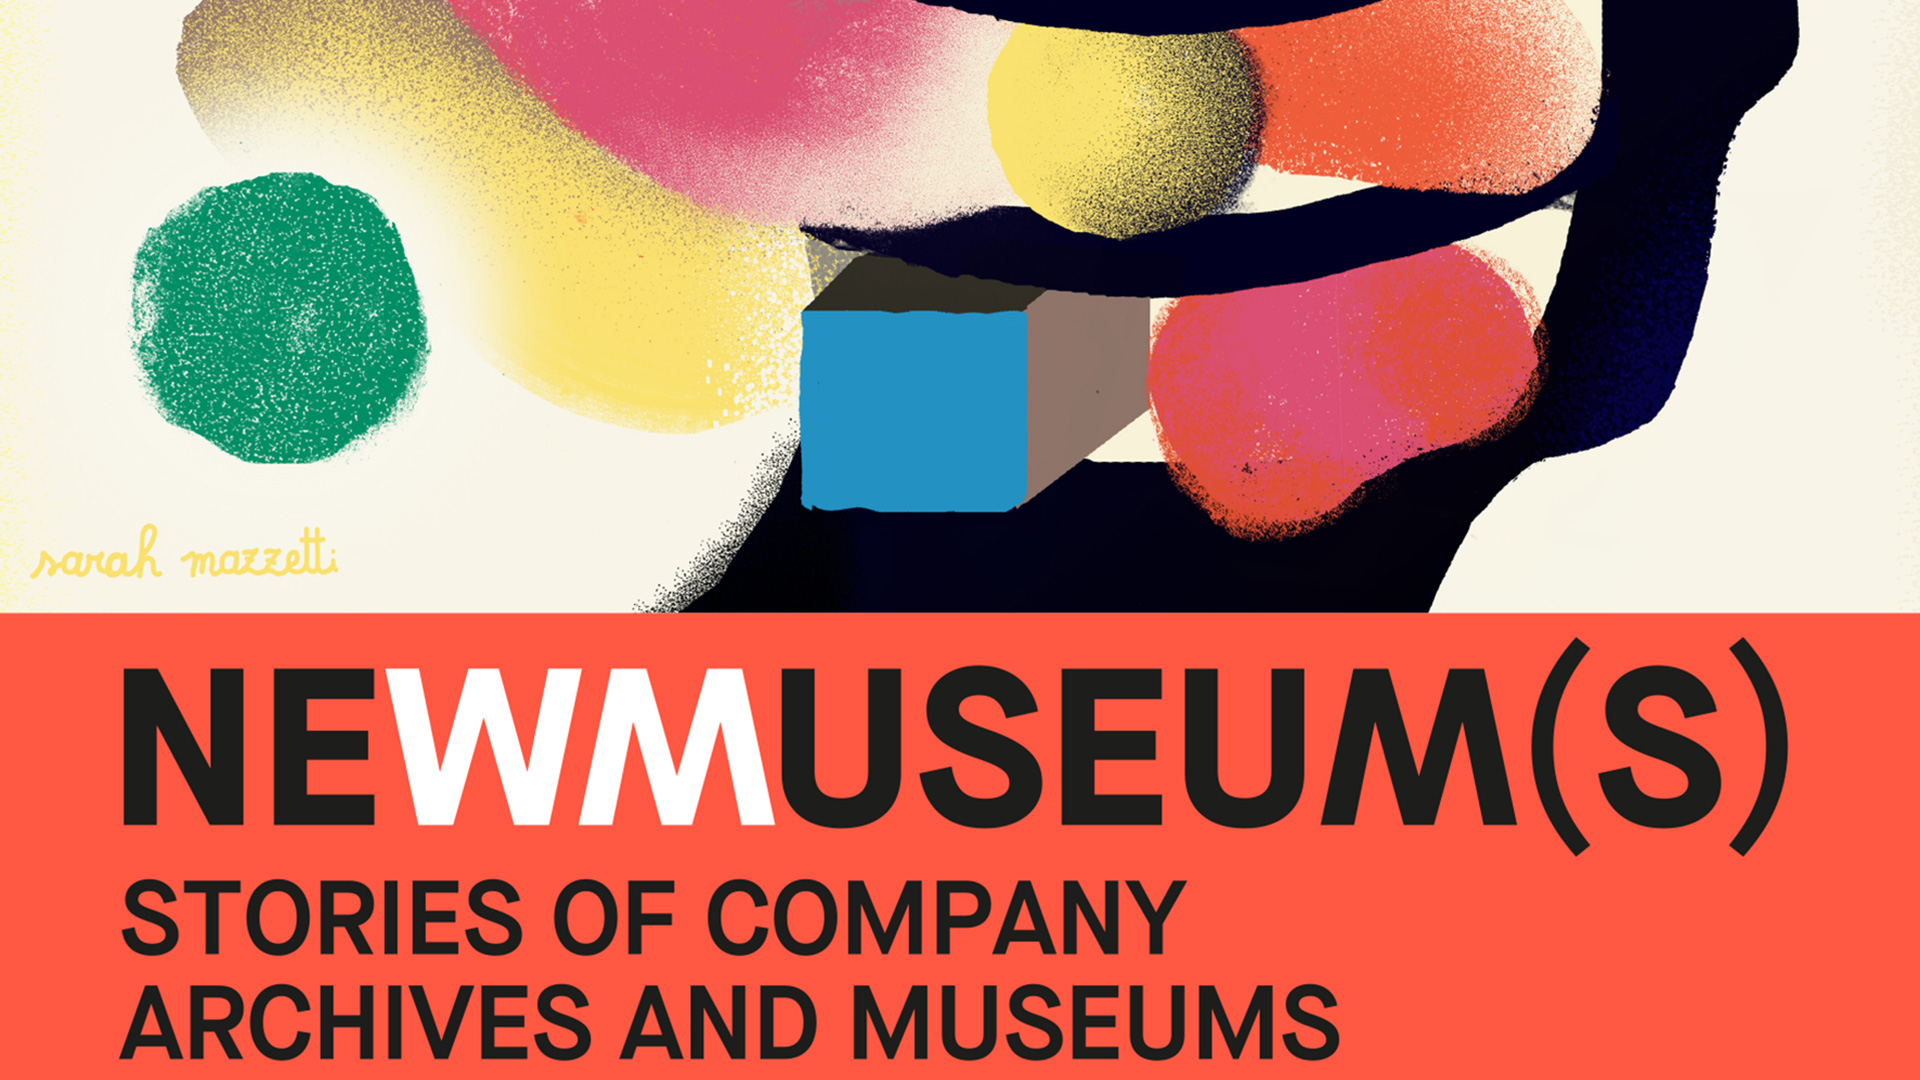 Newmuseums